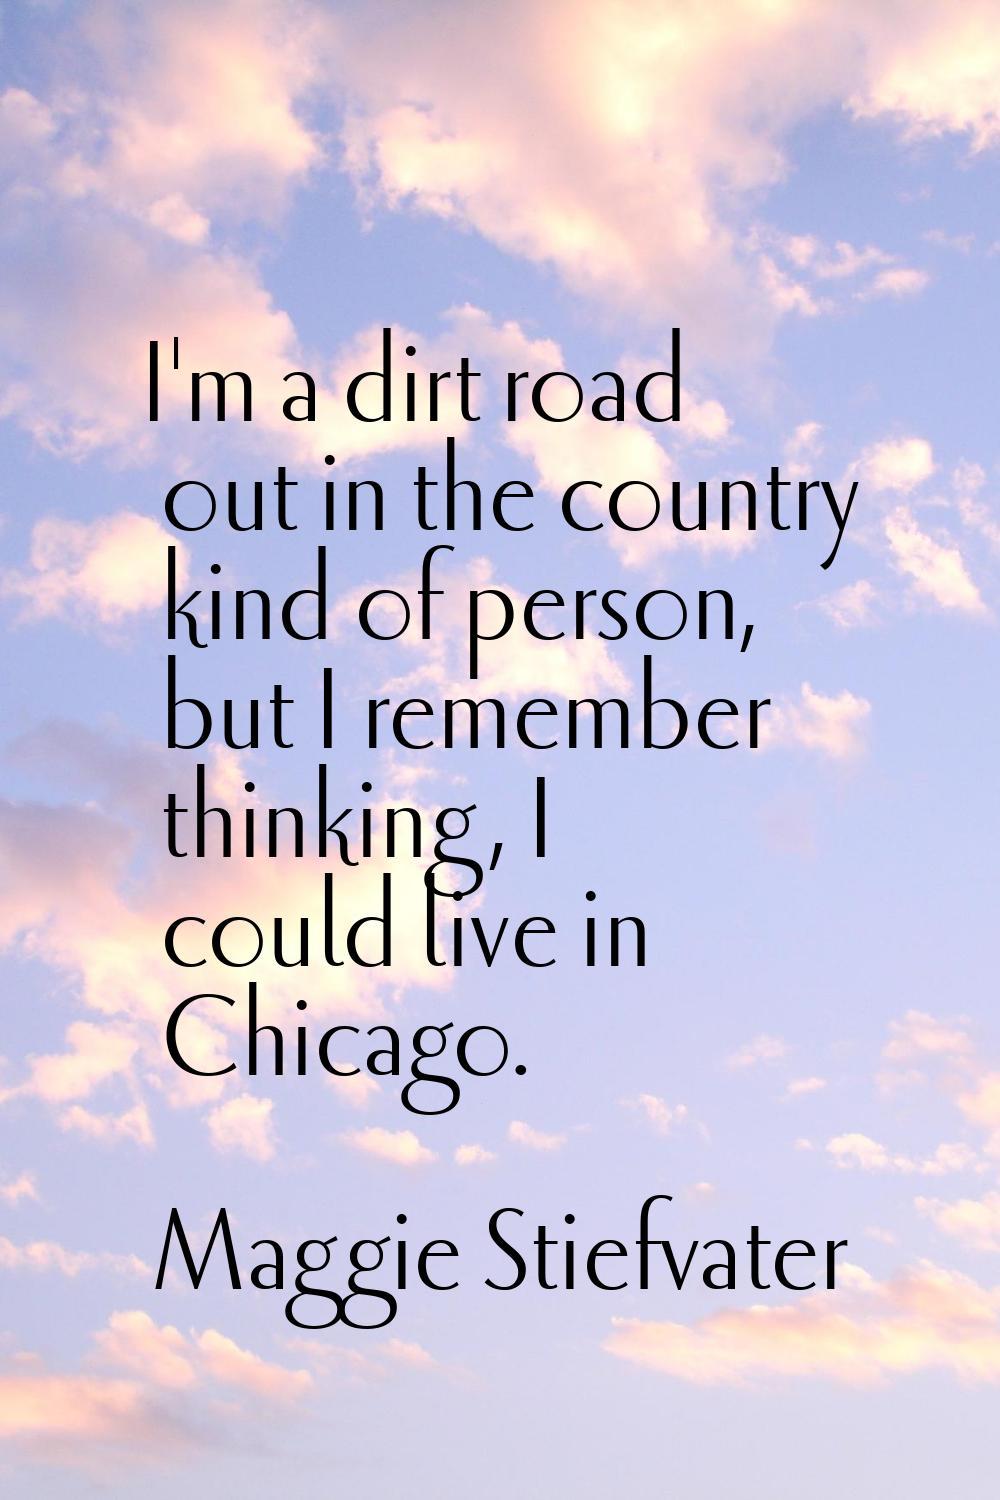 I'm a dirt road out in the country kind of person, but I remember thinking, I could live in Chicago